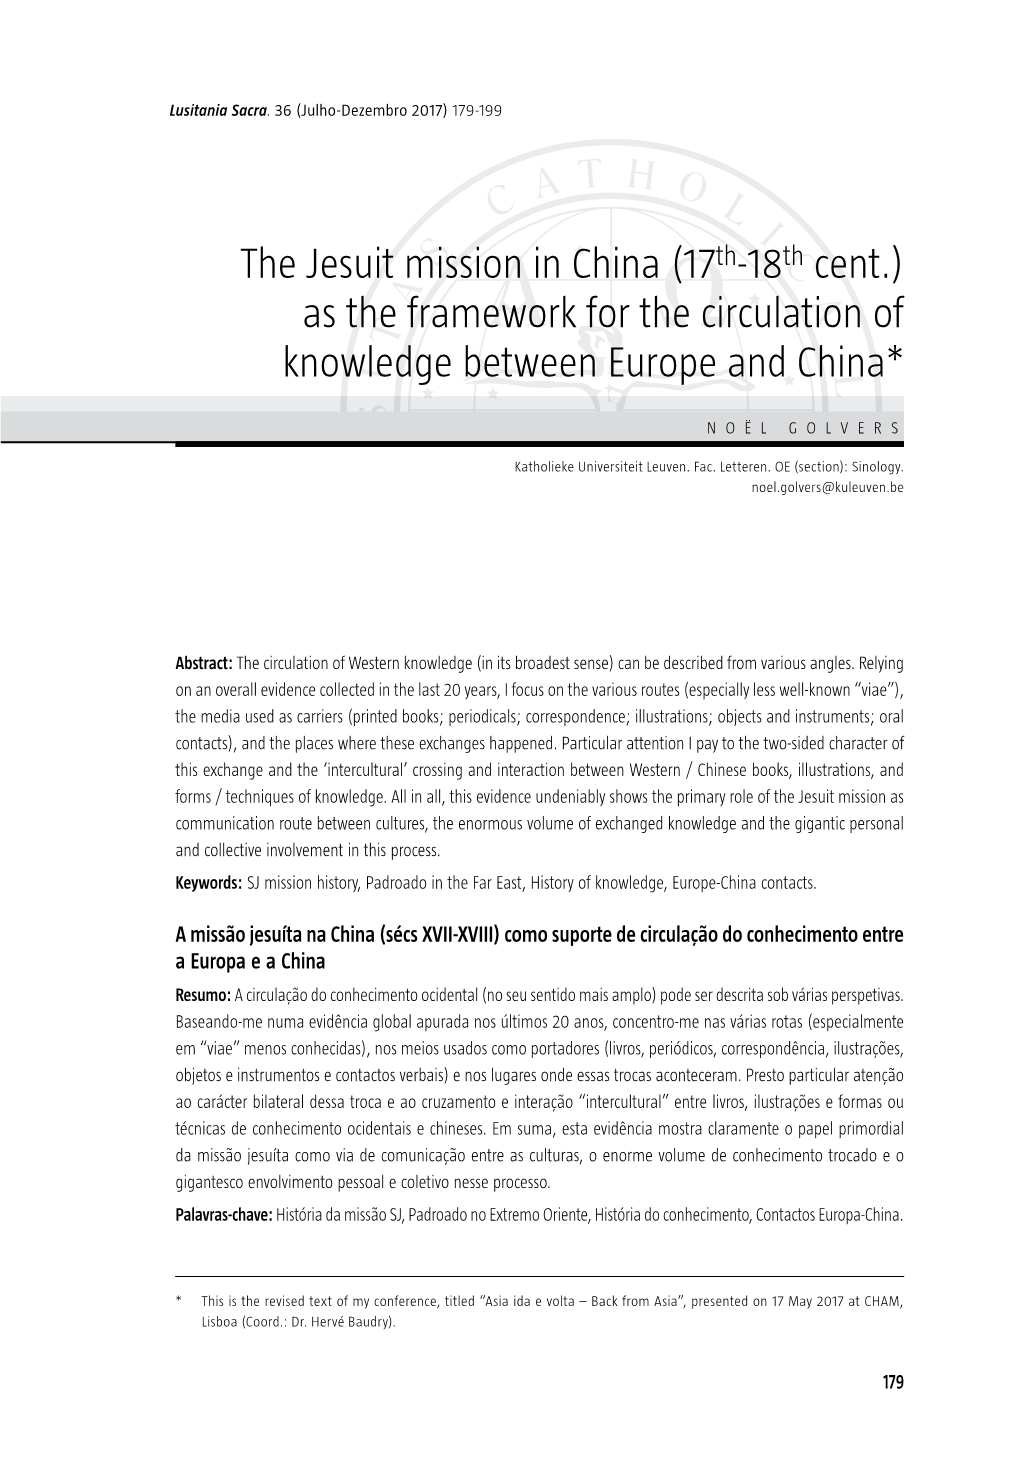 The Jesuit Mission in China (17Th-18Th Cent .) As the Framework for the Circulation of Knowledge Between Europe and China*